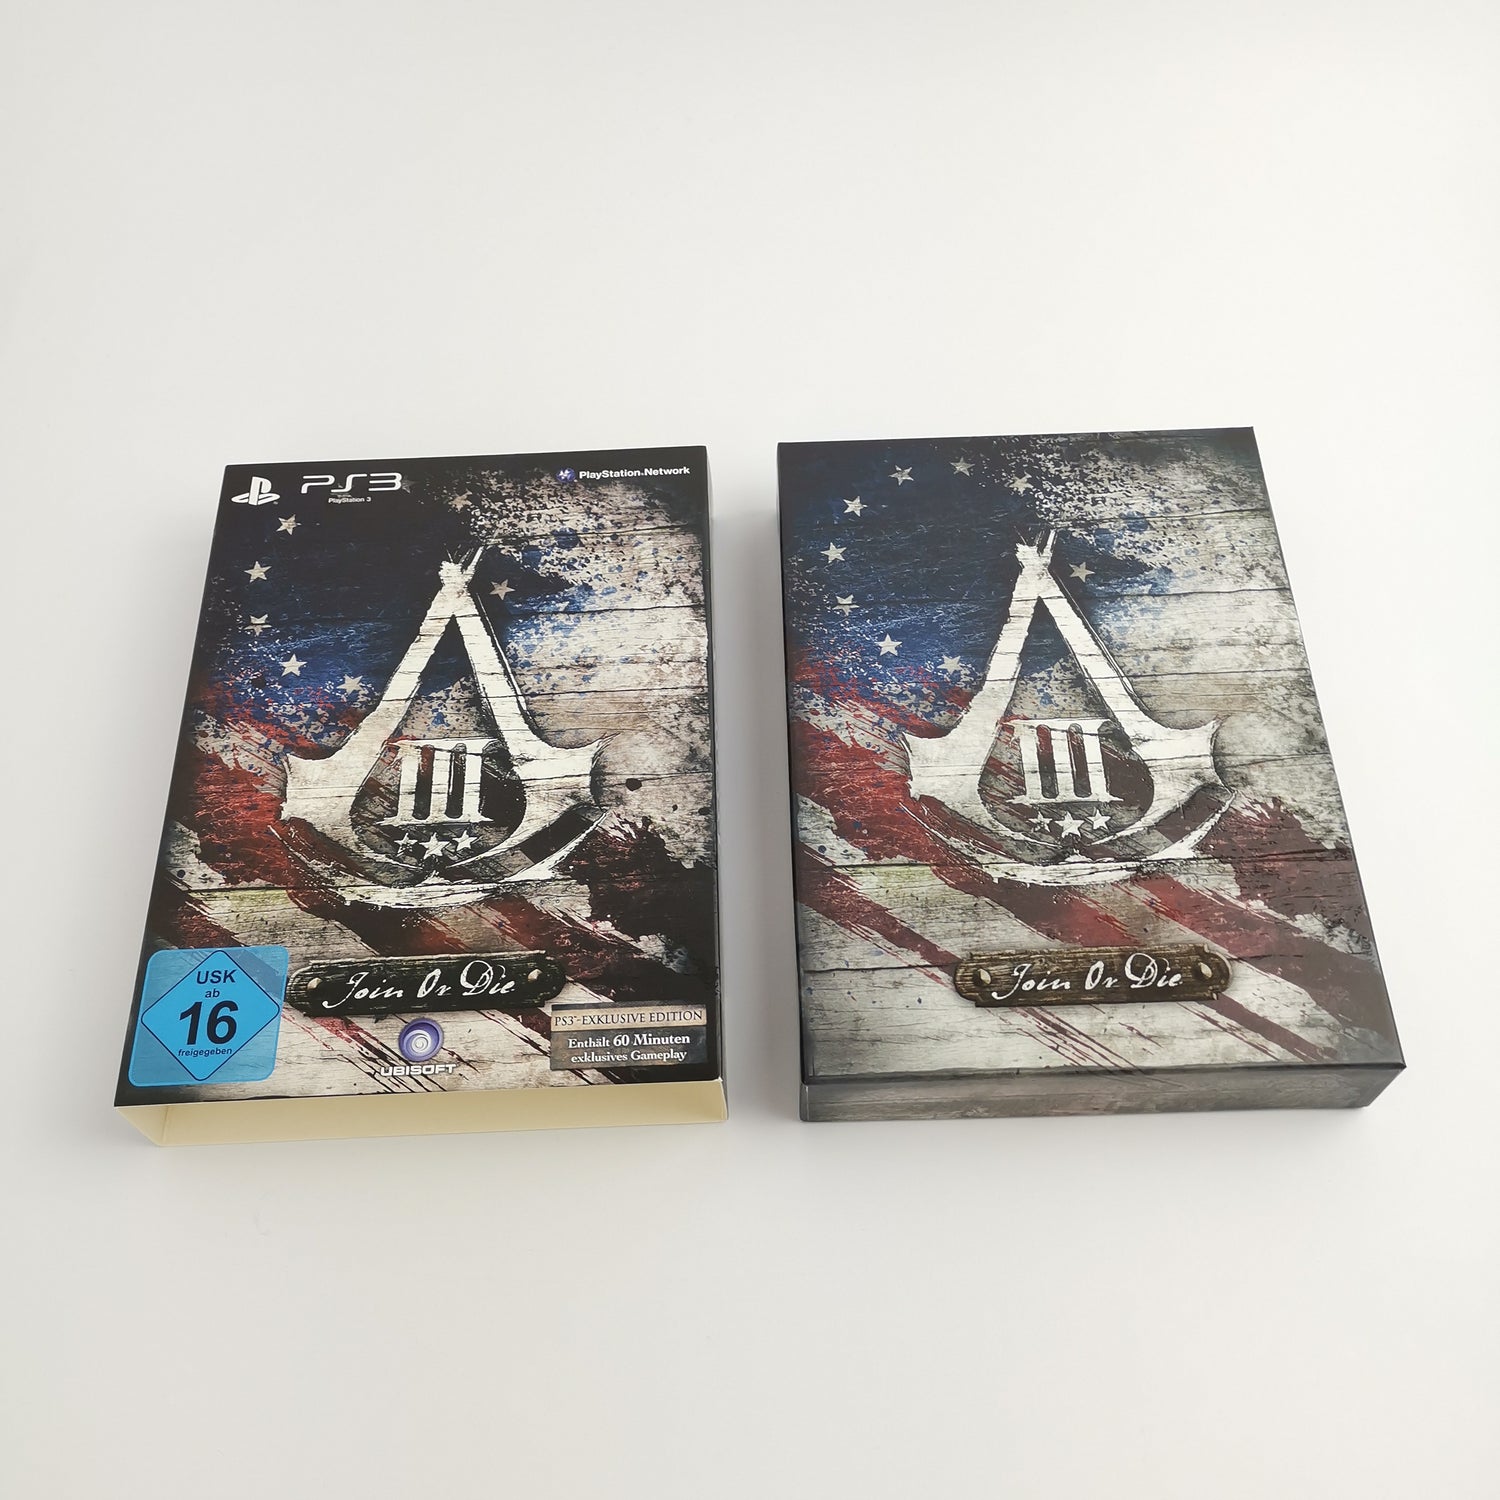 Sony Playstation 3 : Assasins Creed 3 Join or Die Ohne Spiel ! | PS3 OVP